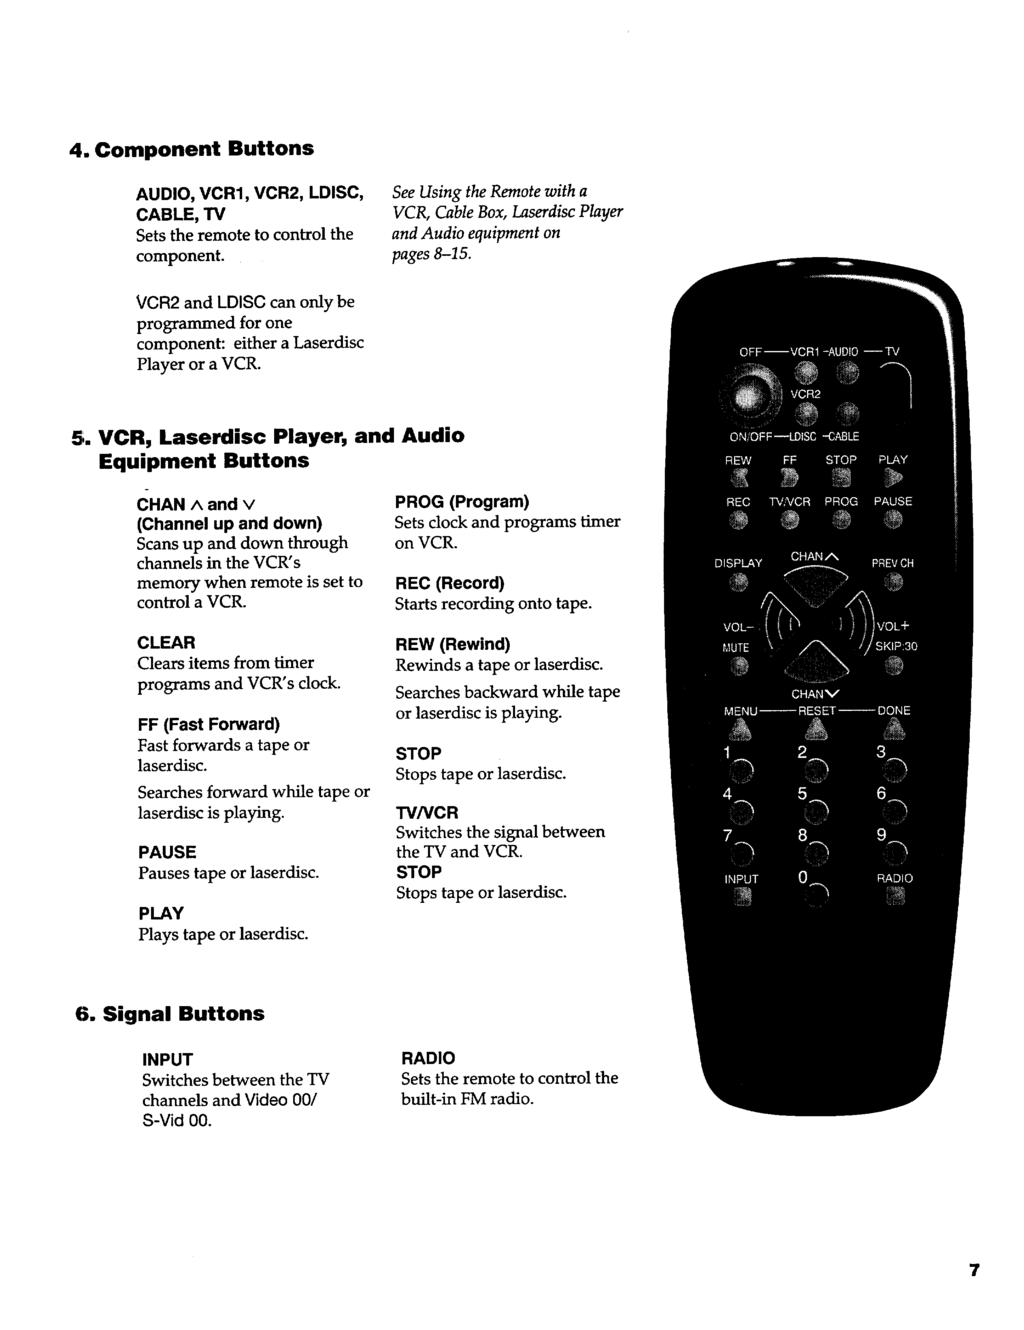 4. Component Buttons AUDIO, VCR1, VCR2, LDISC, CABLE, TV Setsthe remote to control the component. See Using the Remote with a VCR, Cable Box, Laserdisc Player and Audio equipment on pages 8-15.